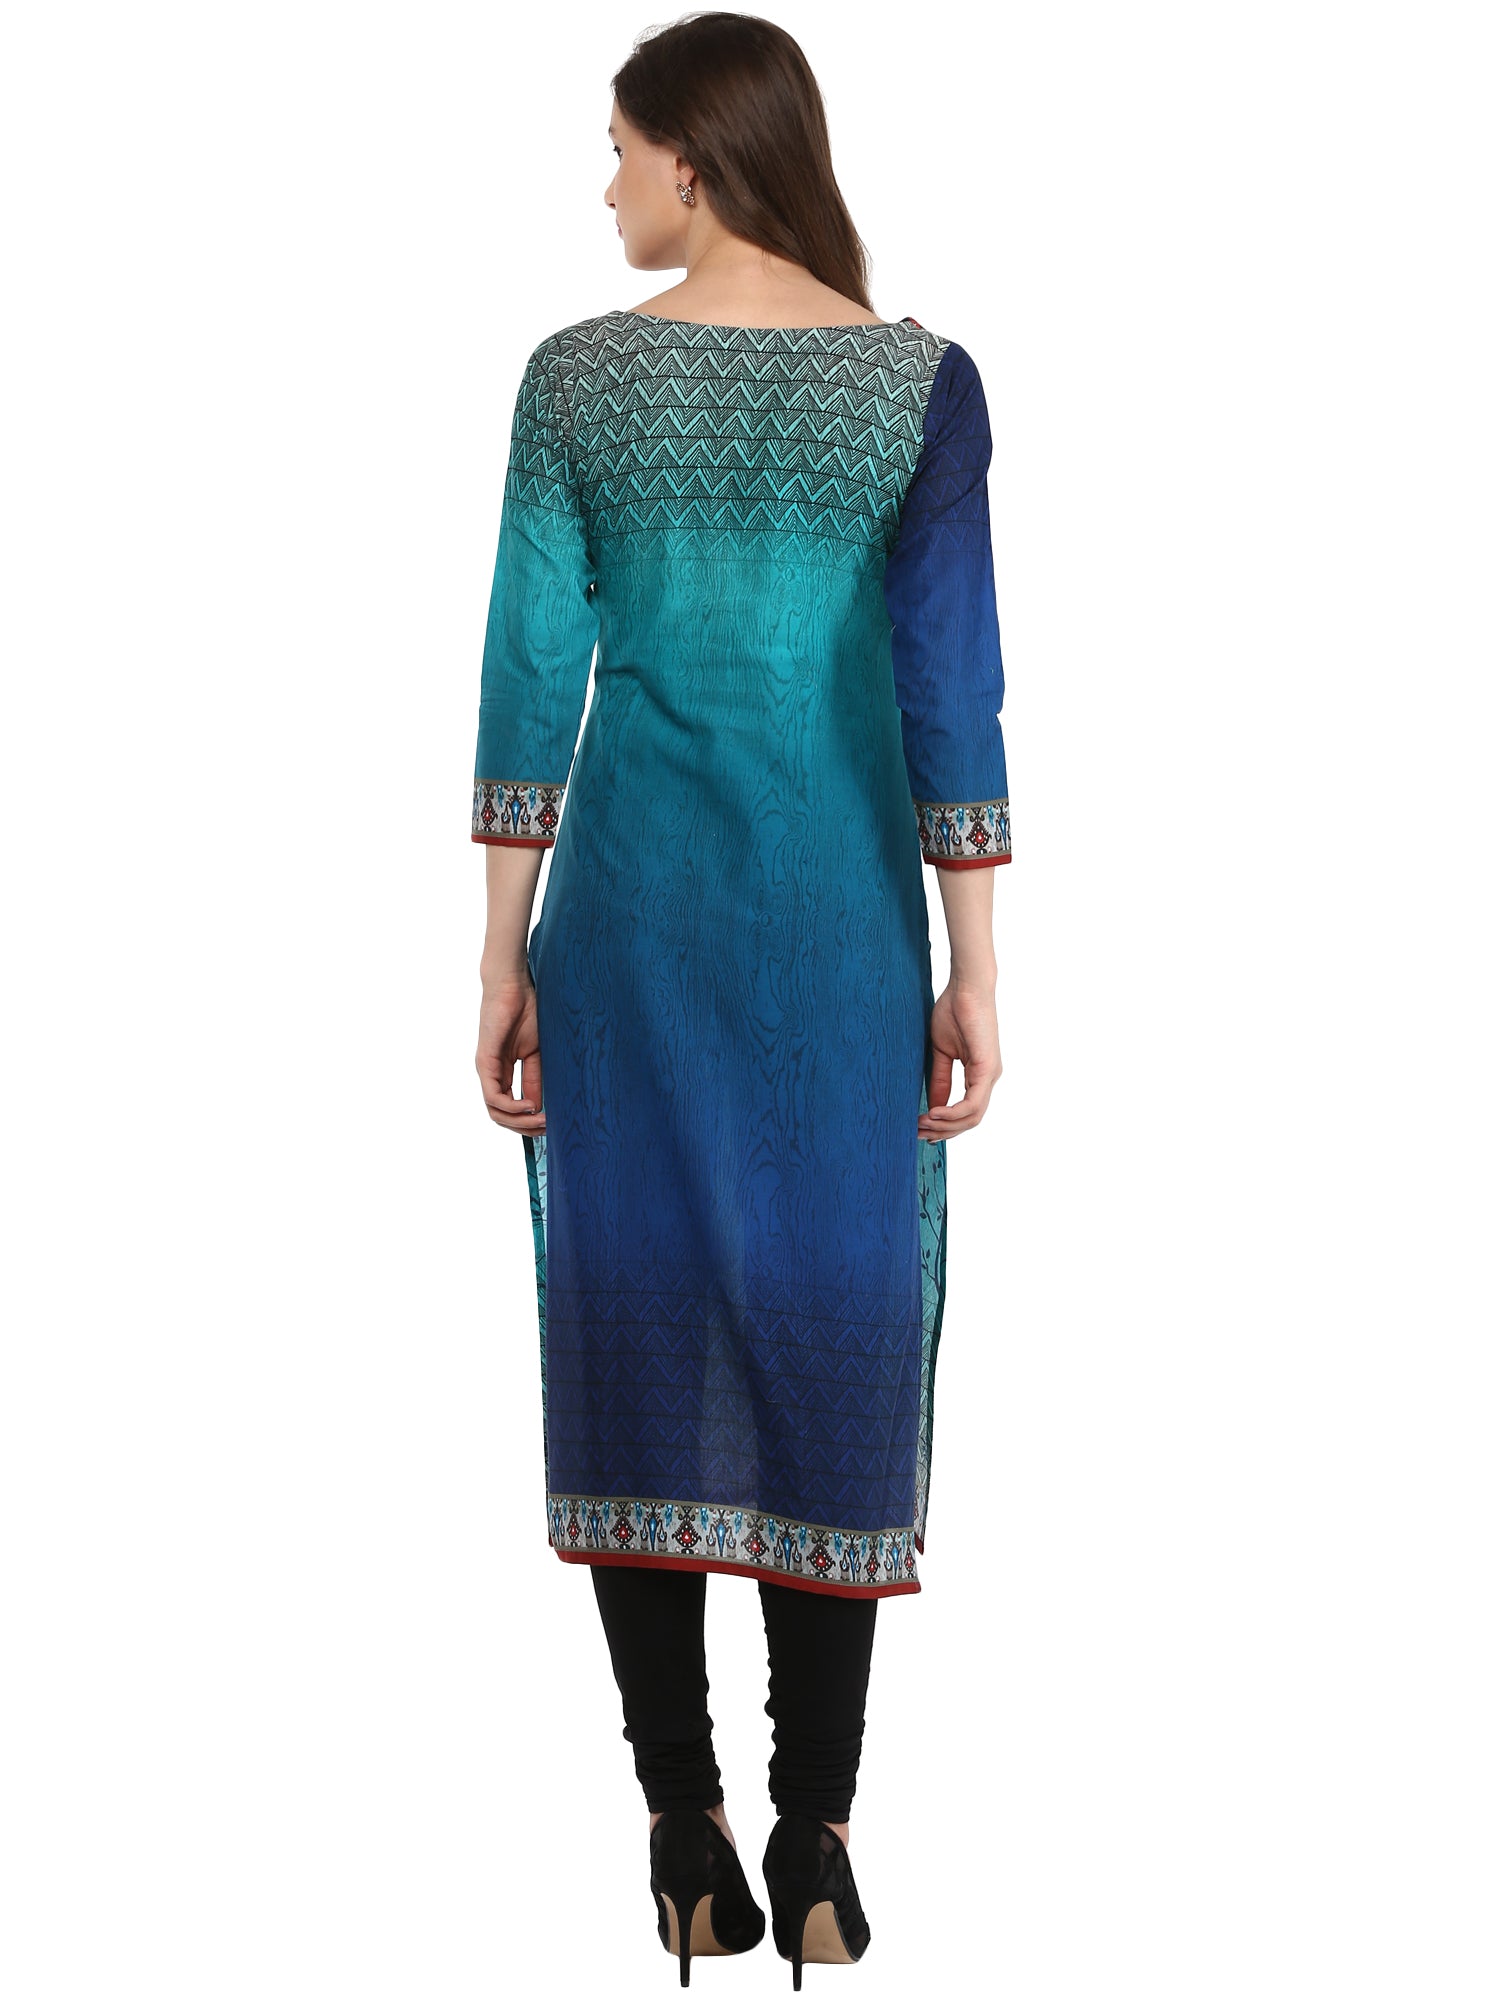 Women's Shades Of Blue Cotton Printed Only Kurti - Ahalyaa